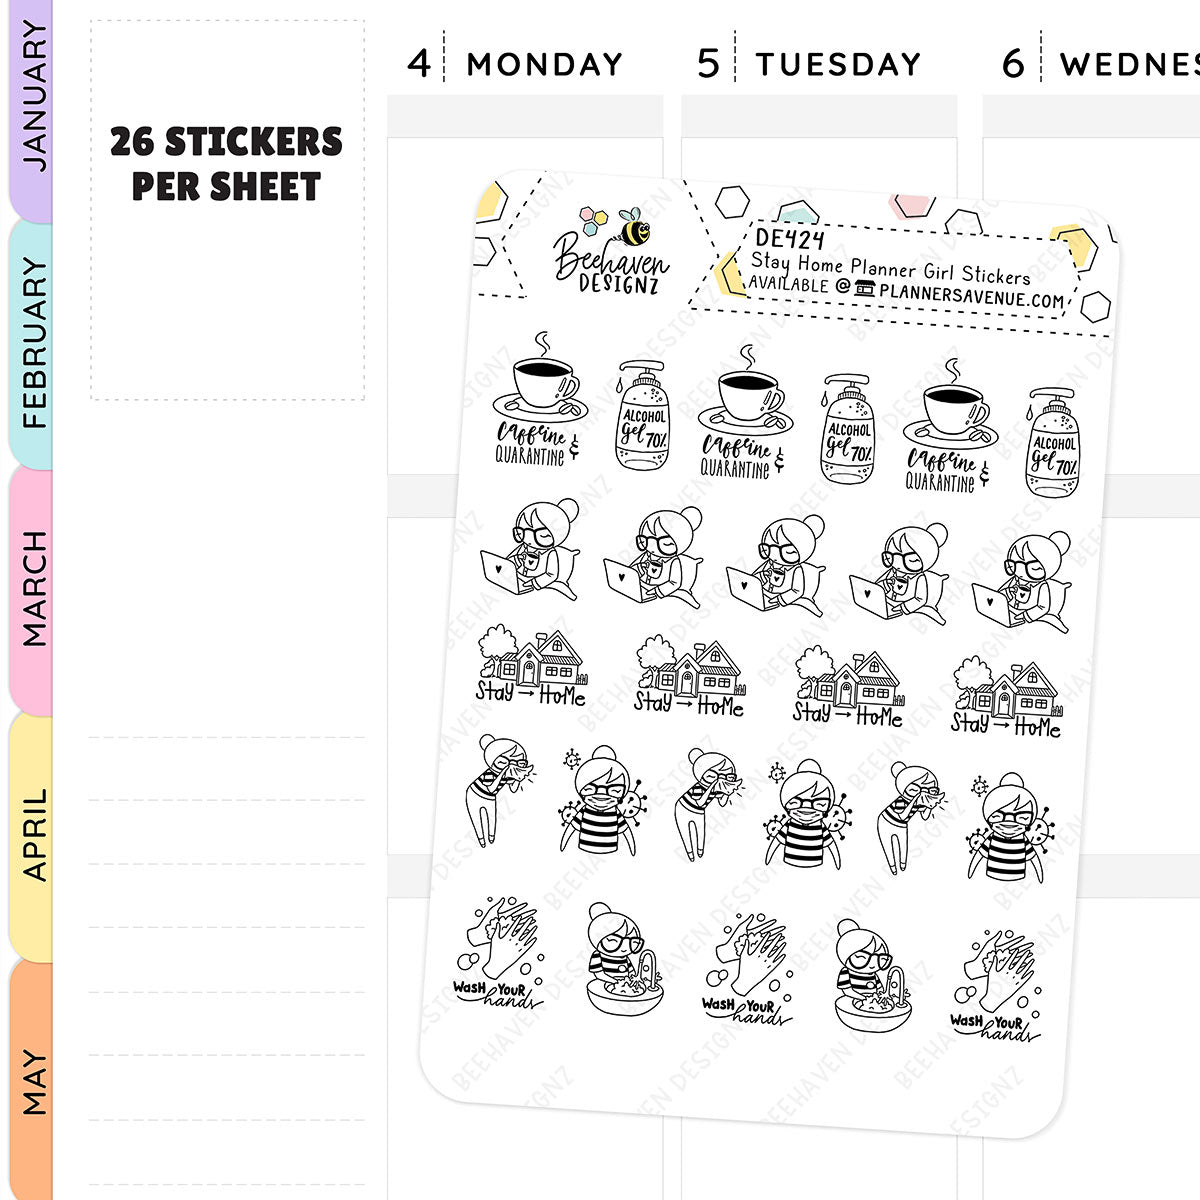 Work from Home Sick Planner Girl Stickers